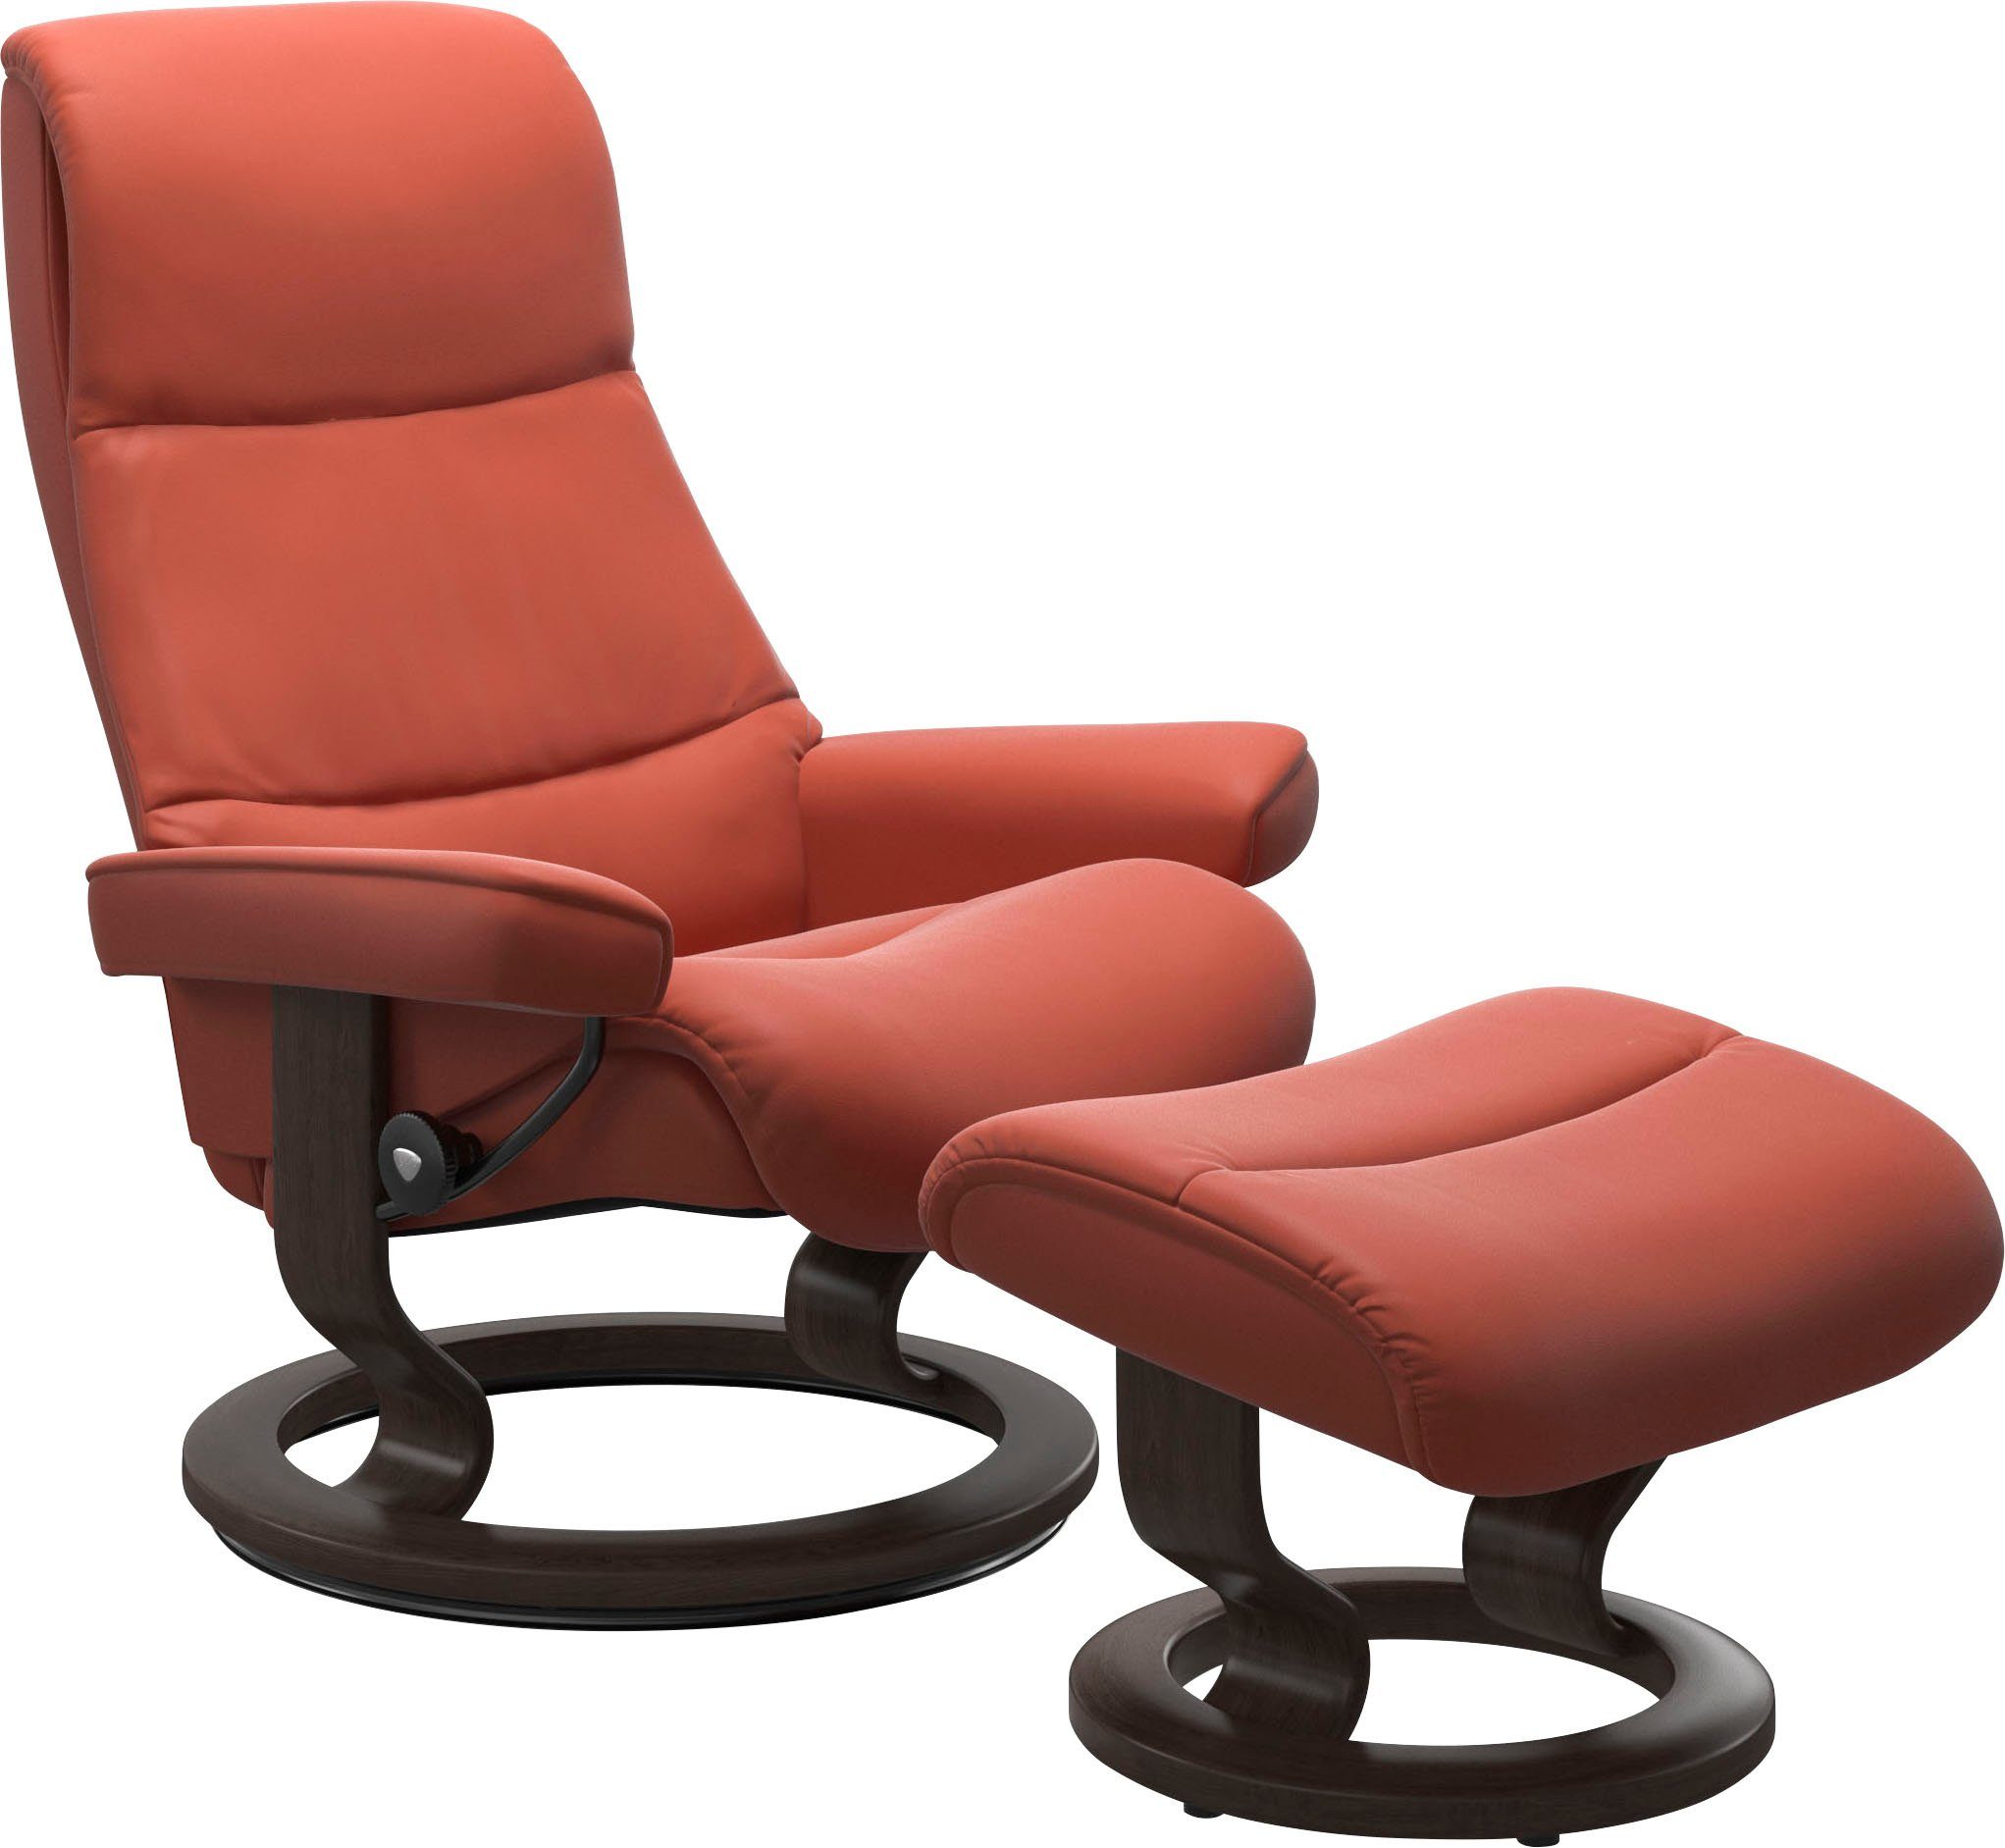 Stressless® Größe Classic Base, View, Relaxsessel mit S,Gestell Wenge